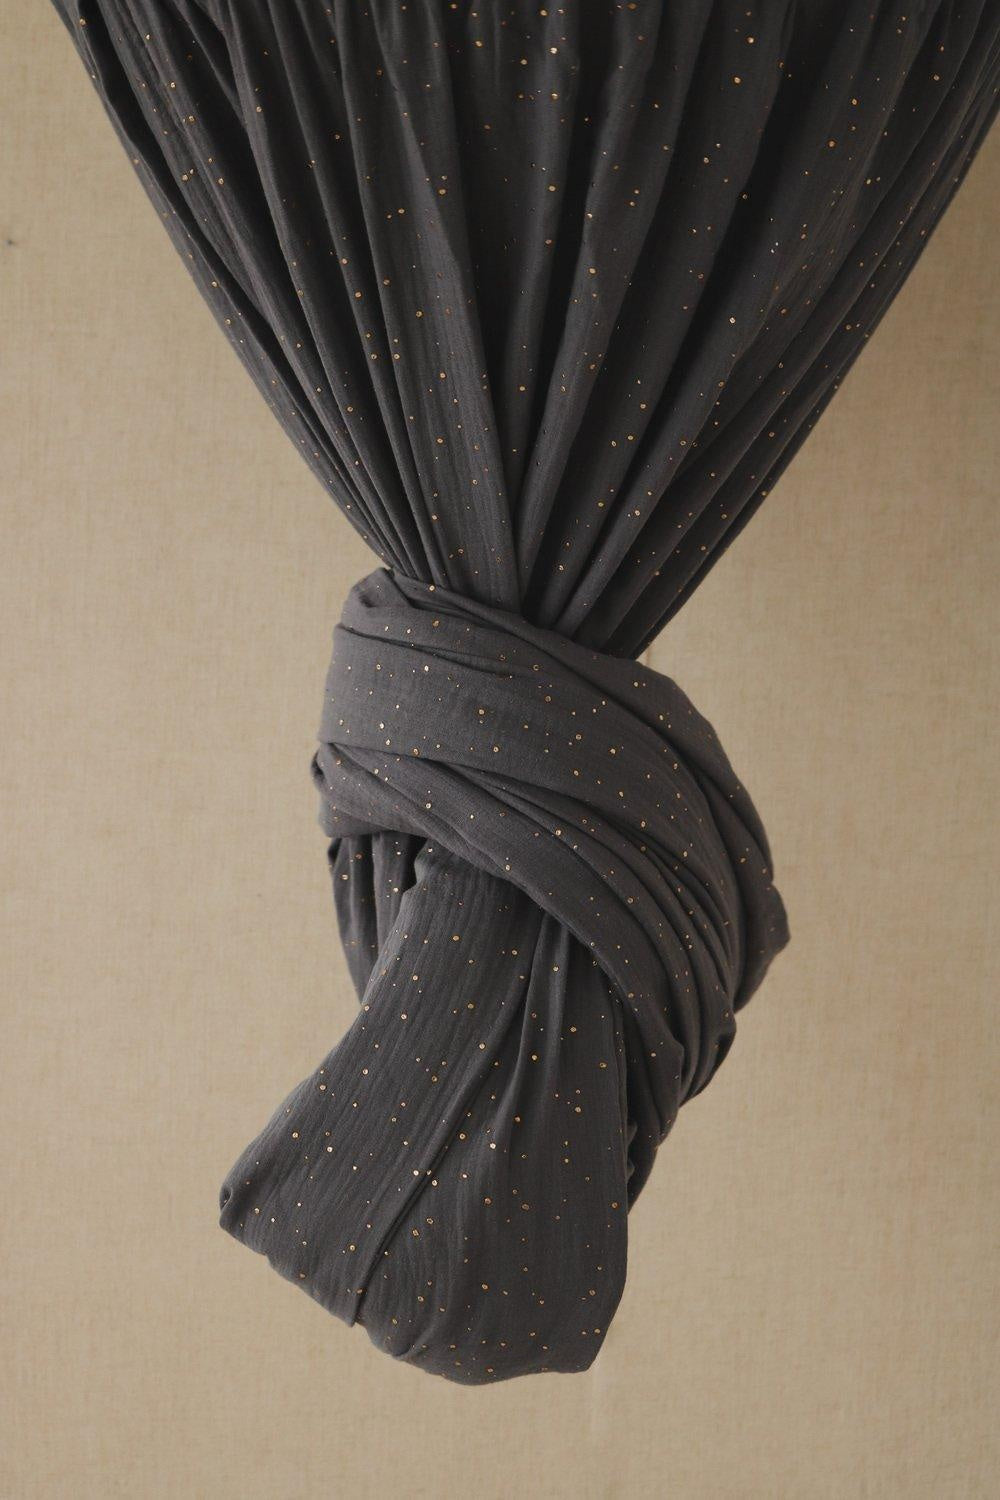 “Anthracite and Gold” Canopy by Moi Mili